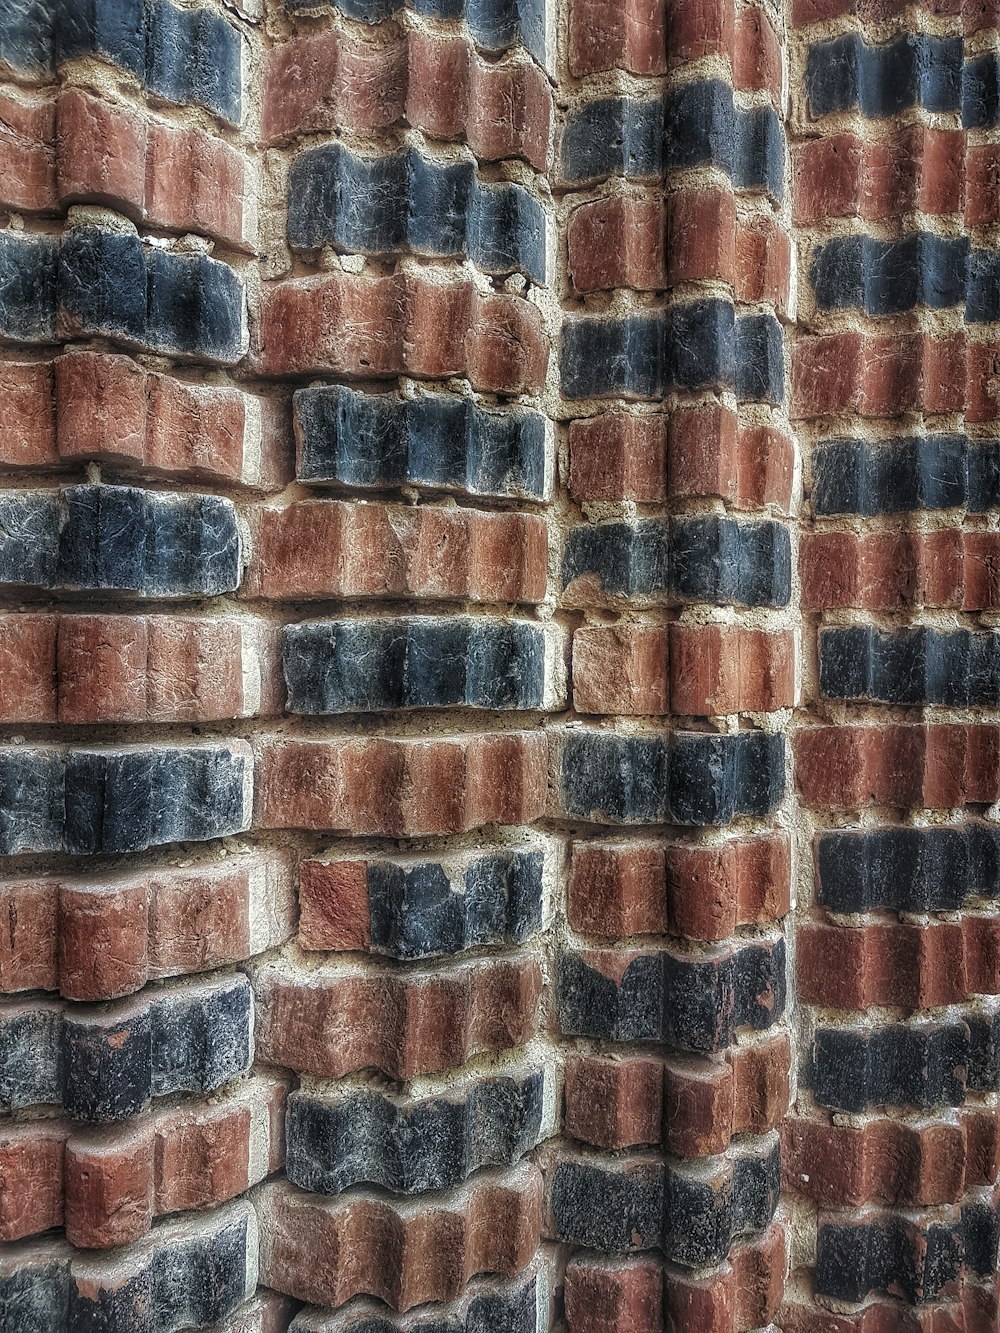 A brick wall texture pattern with black and red bricks.